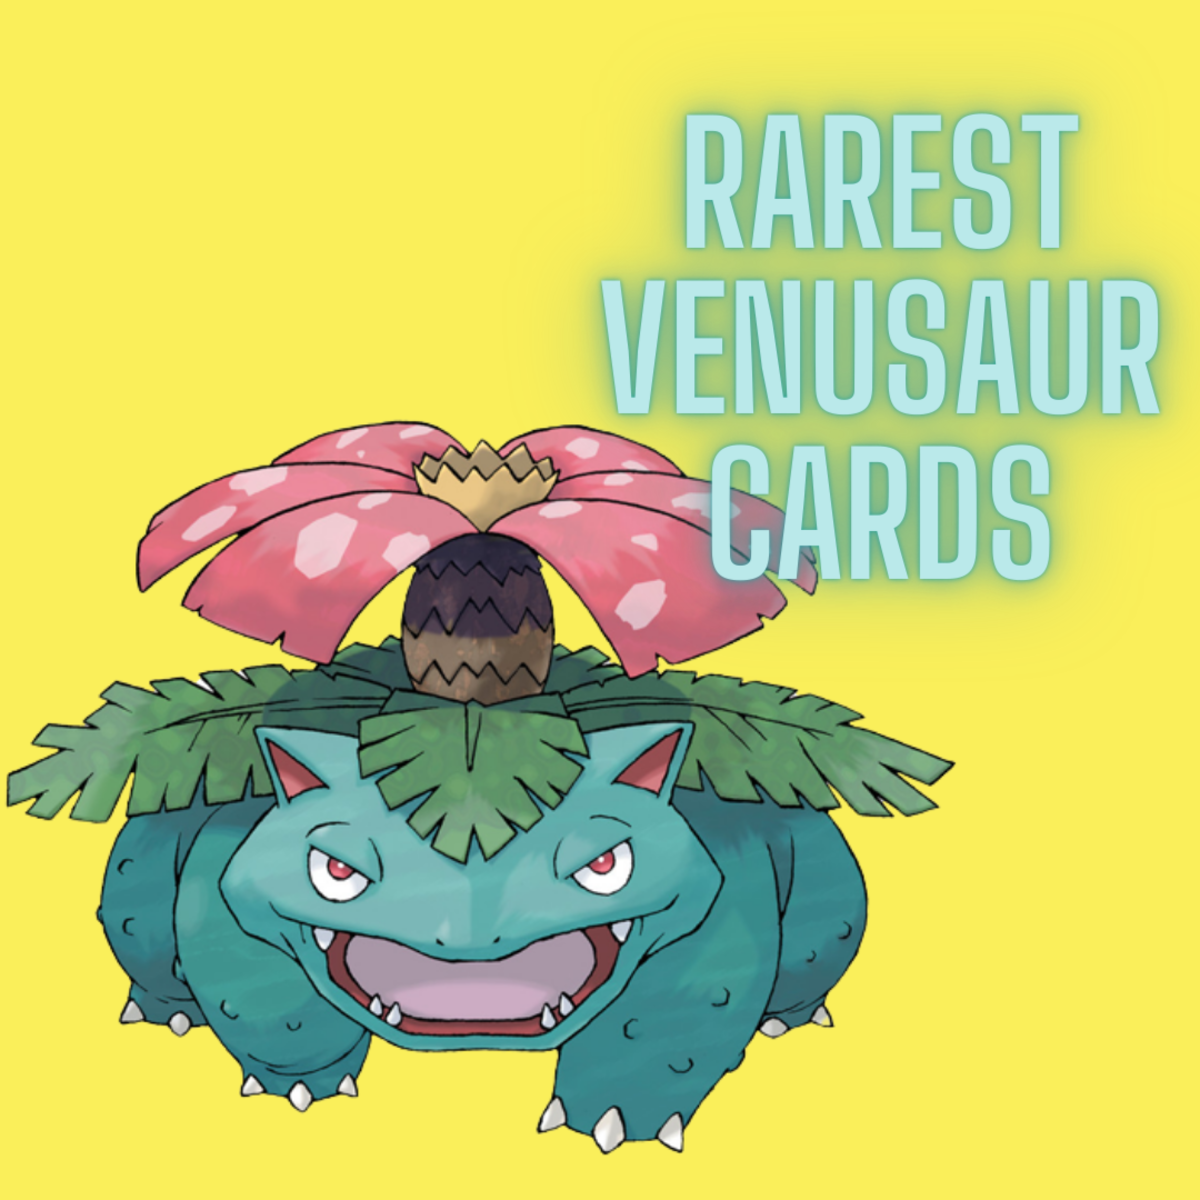 The 5 Most Expensive Gengar Pokémon Cards